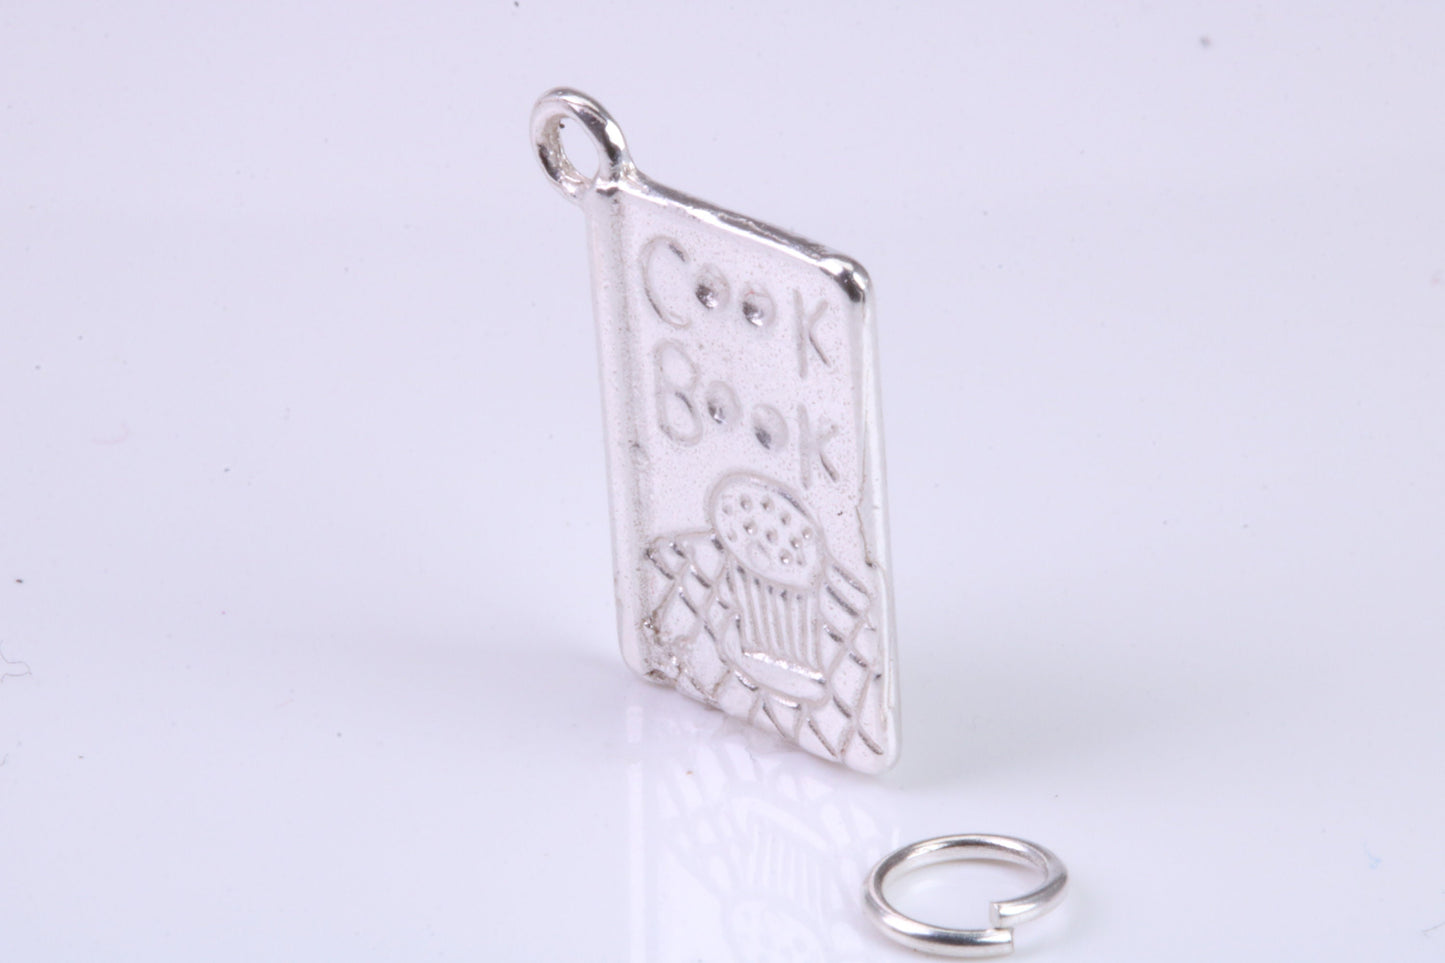 Cook Book Charm, Traditional Charm, Made from Solid 925 Grade Sterling Silver, Complete with Attachment Link